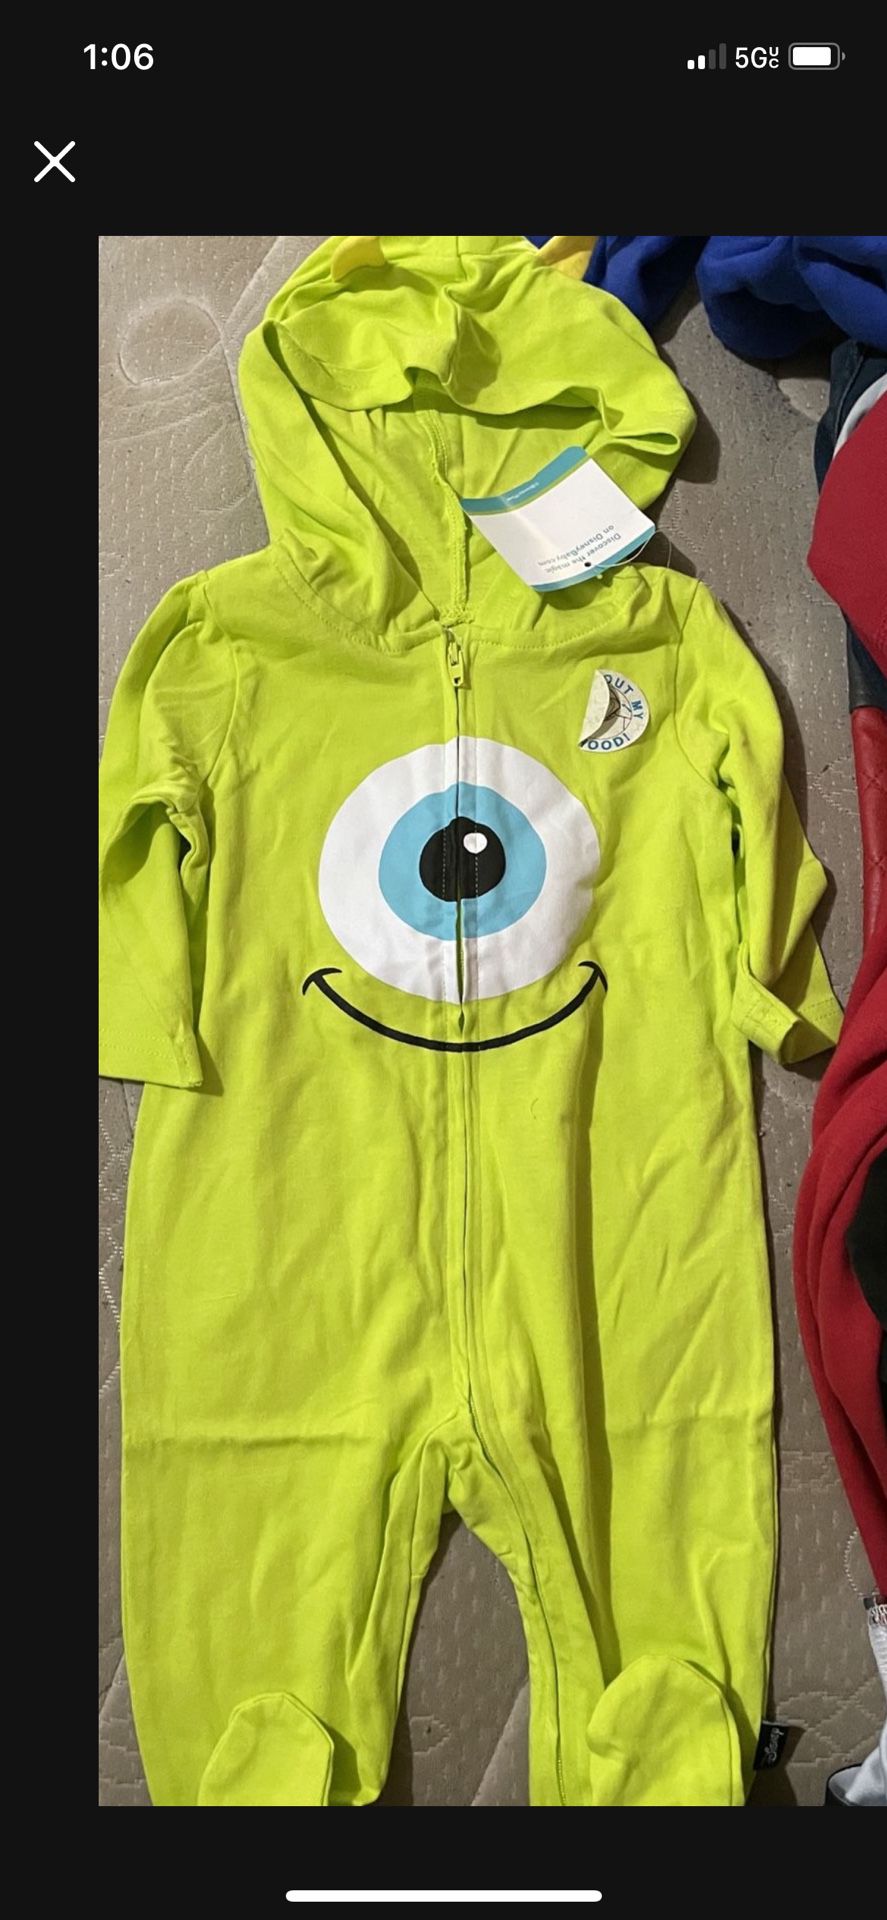 Disney Full Body Onesie Mike Wazowski 3-6 Months NWT Serious inquiries only please  Pick up location in the city of Pico Rivera 